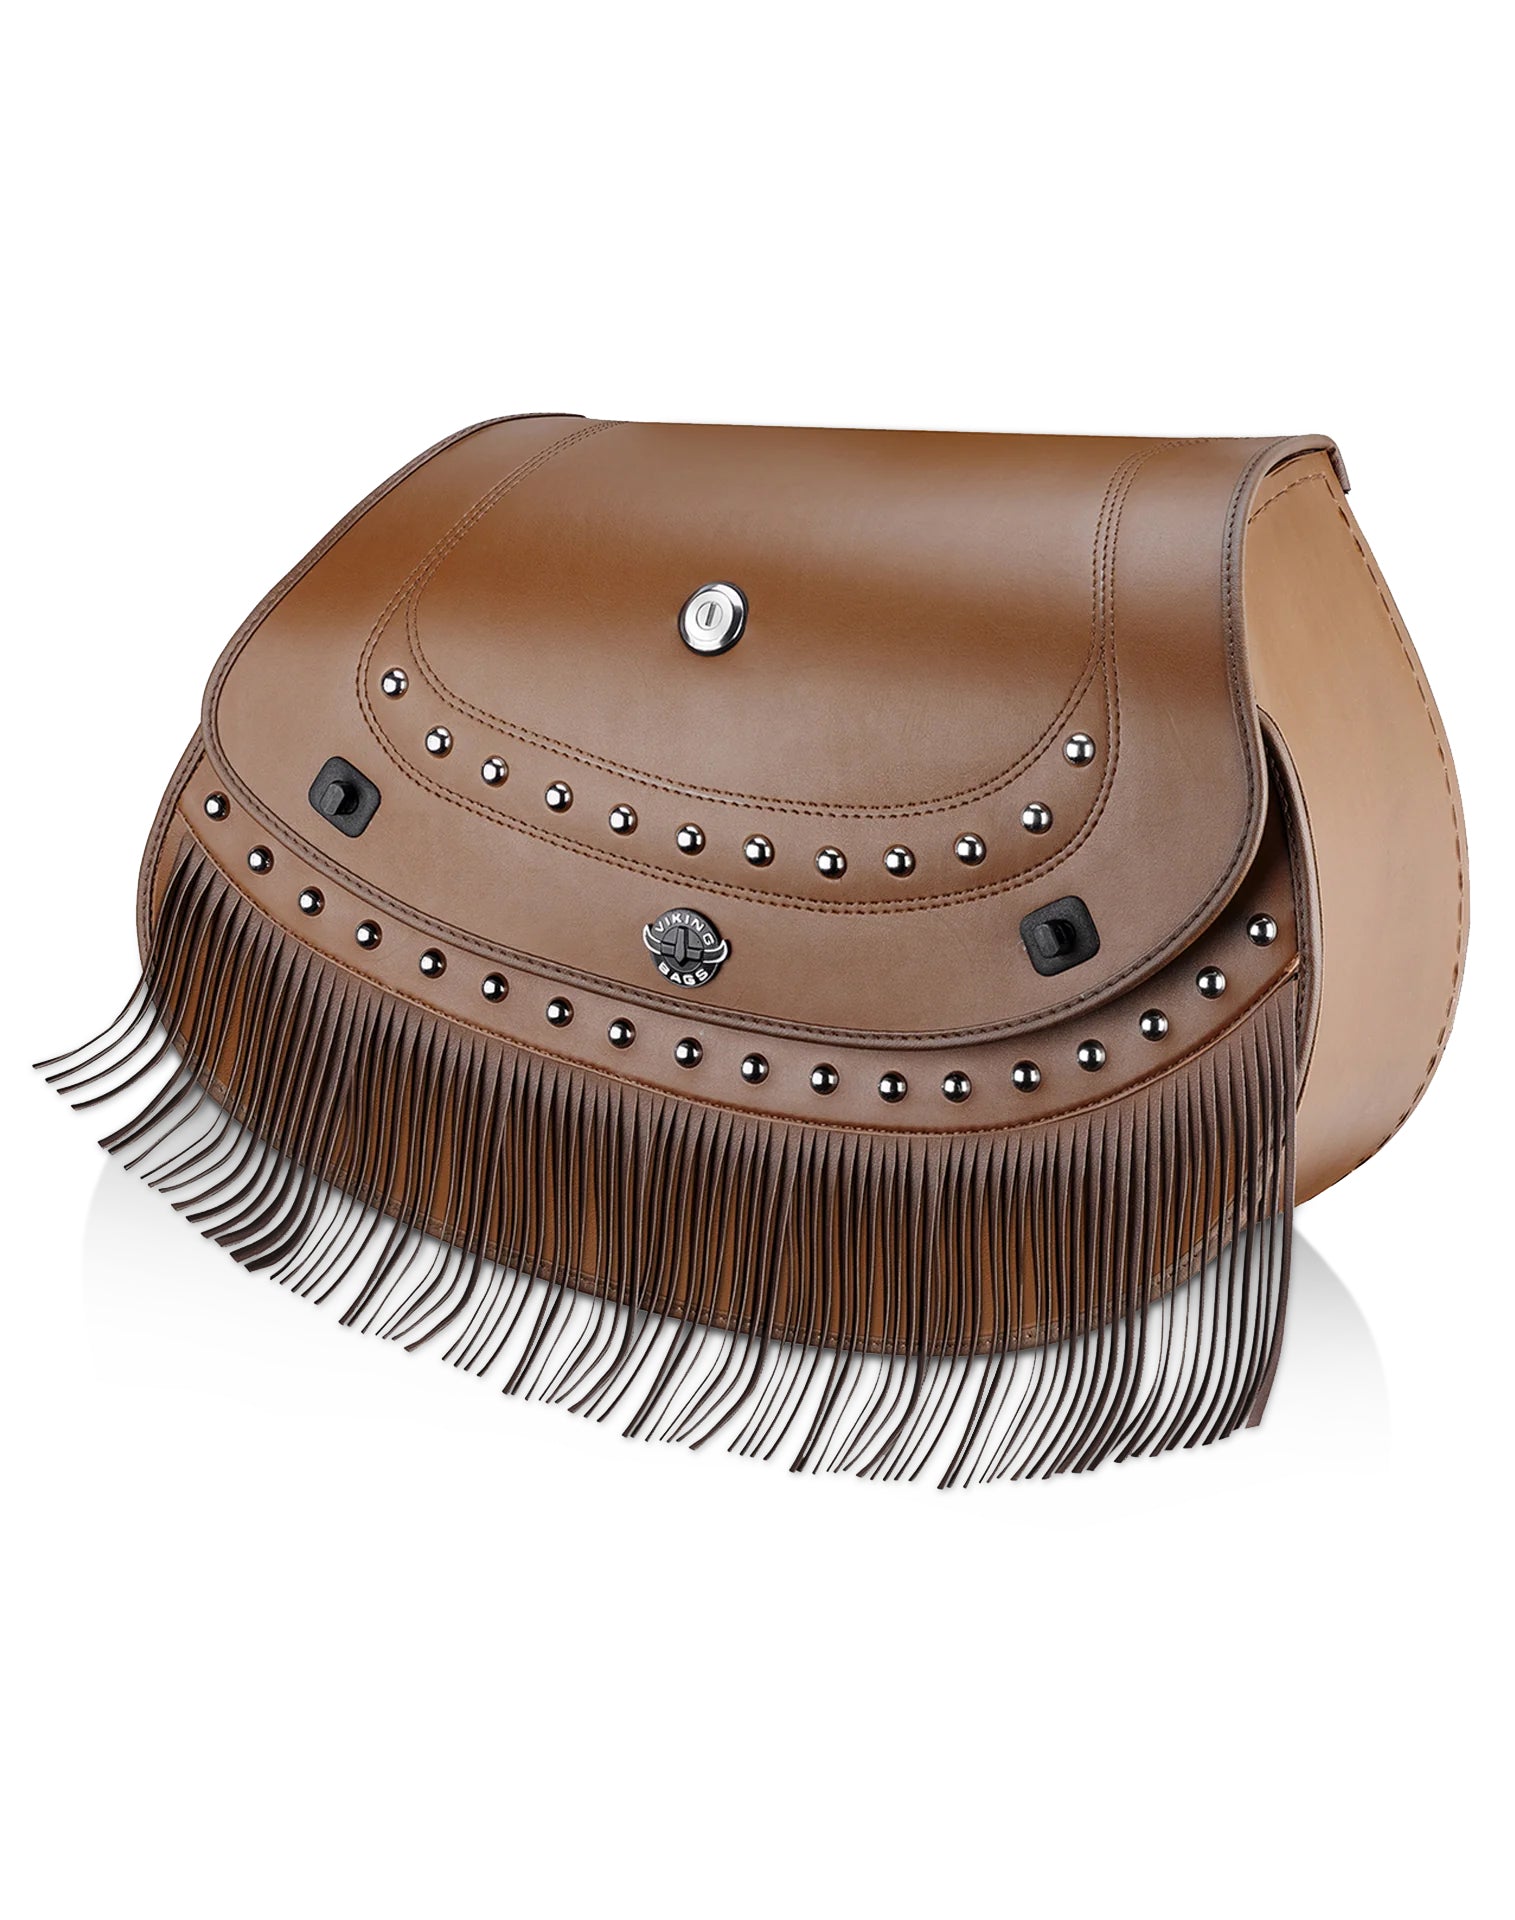 Viking Mohawk Brown Extra Large Indian Springfield Darkhorse Specific Leather Motorcycle Saddlebags Main View